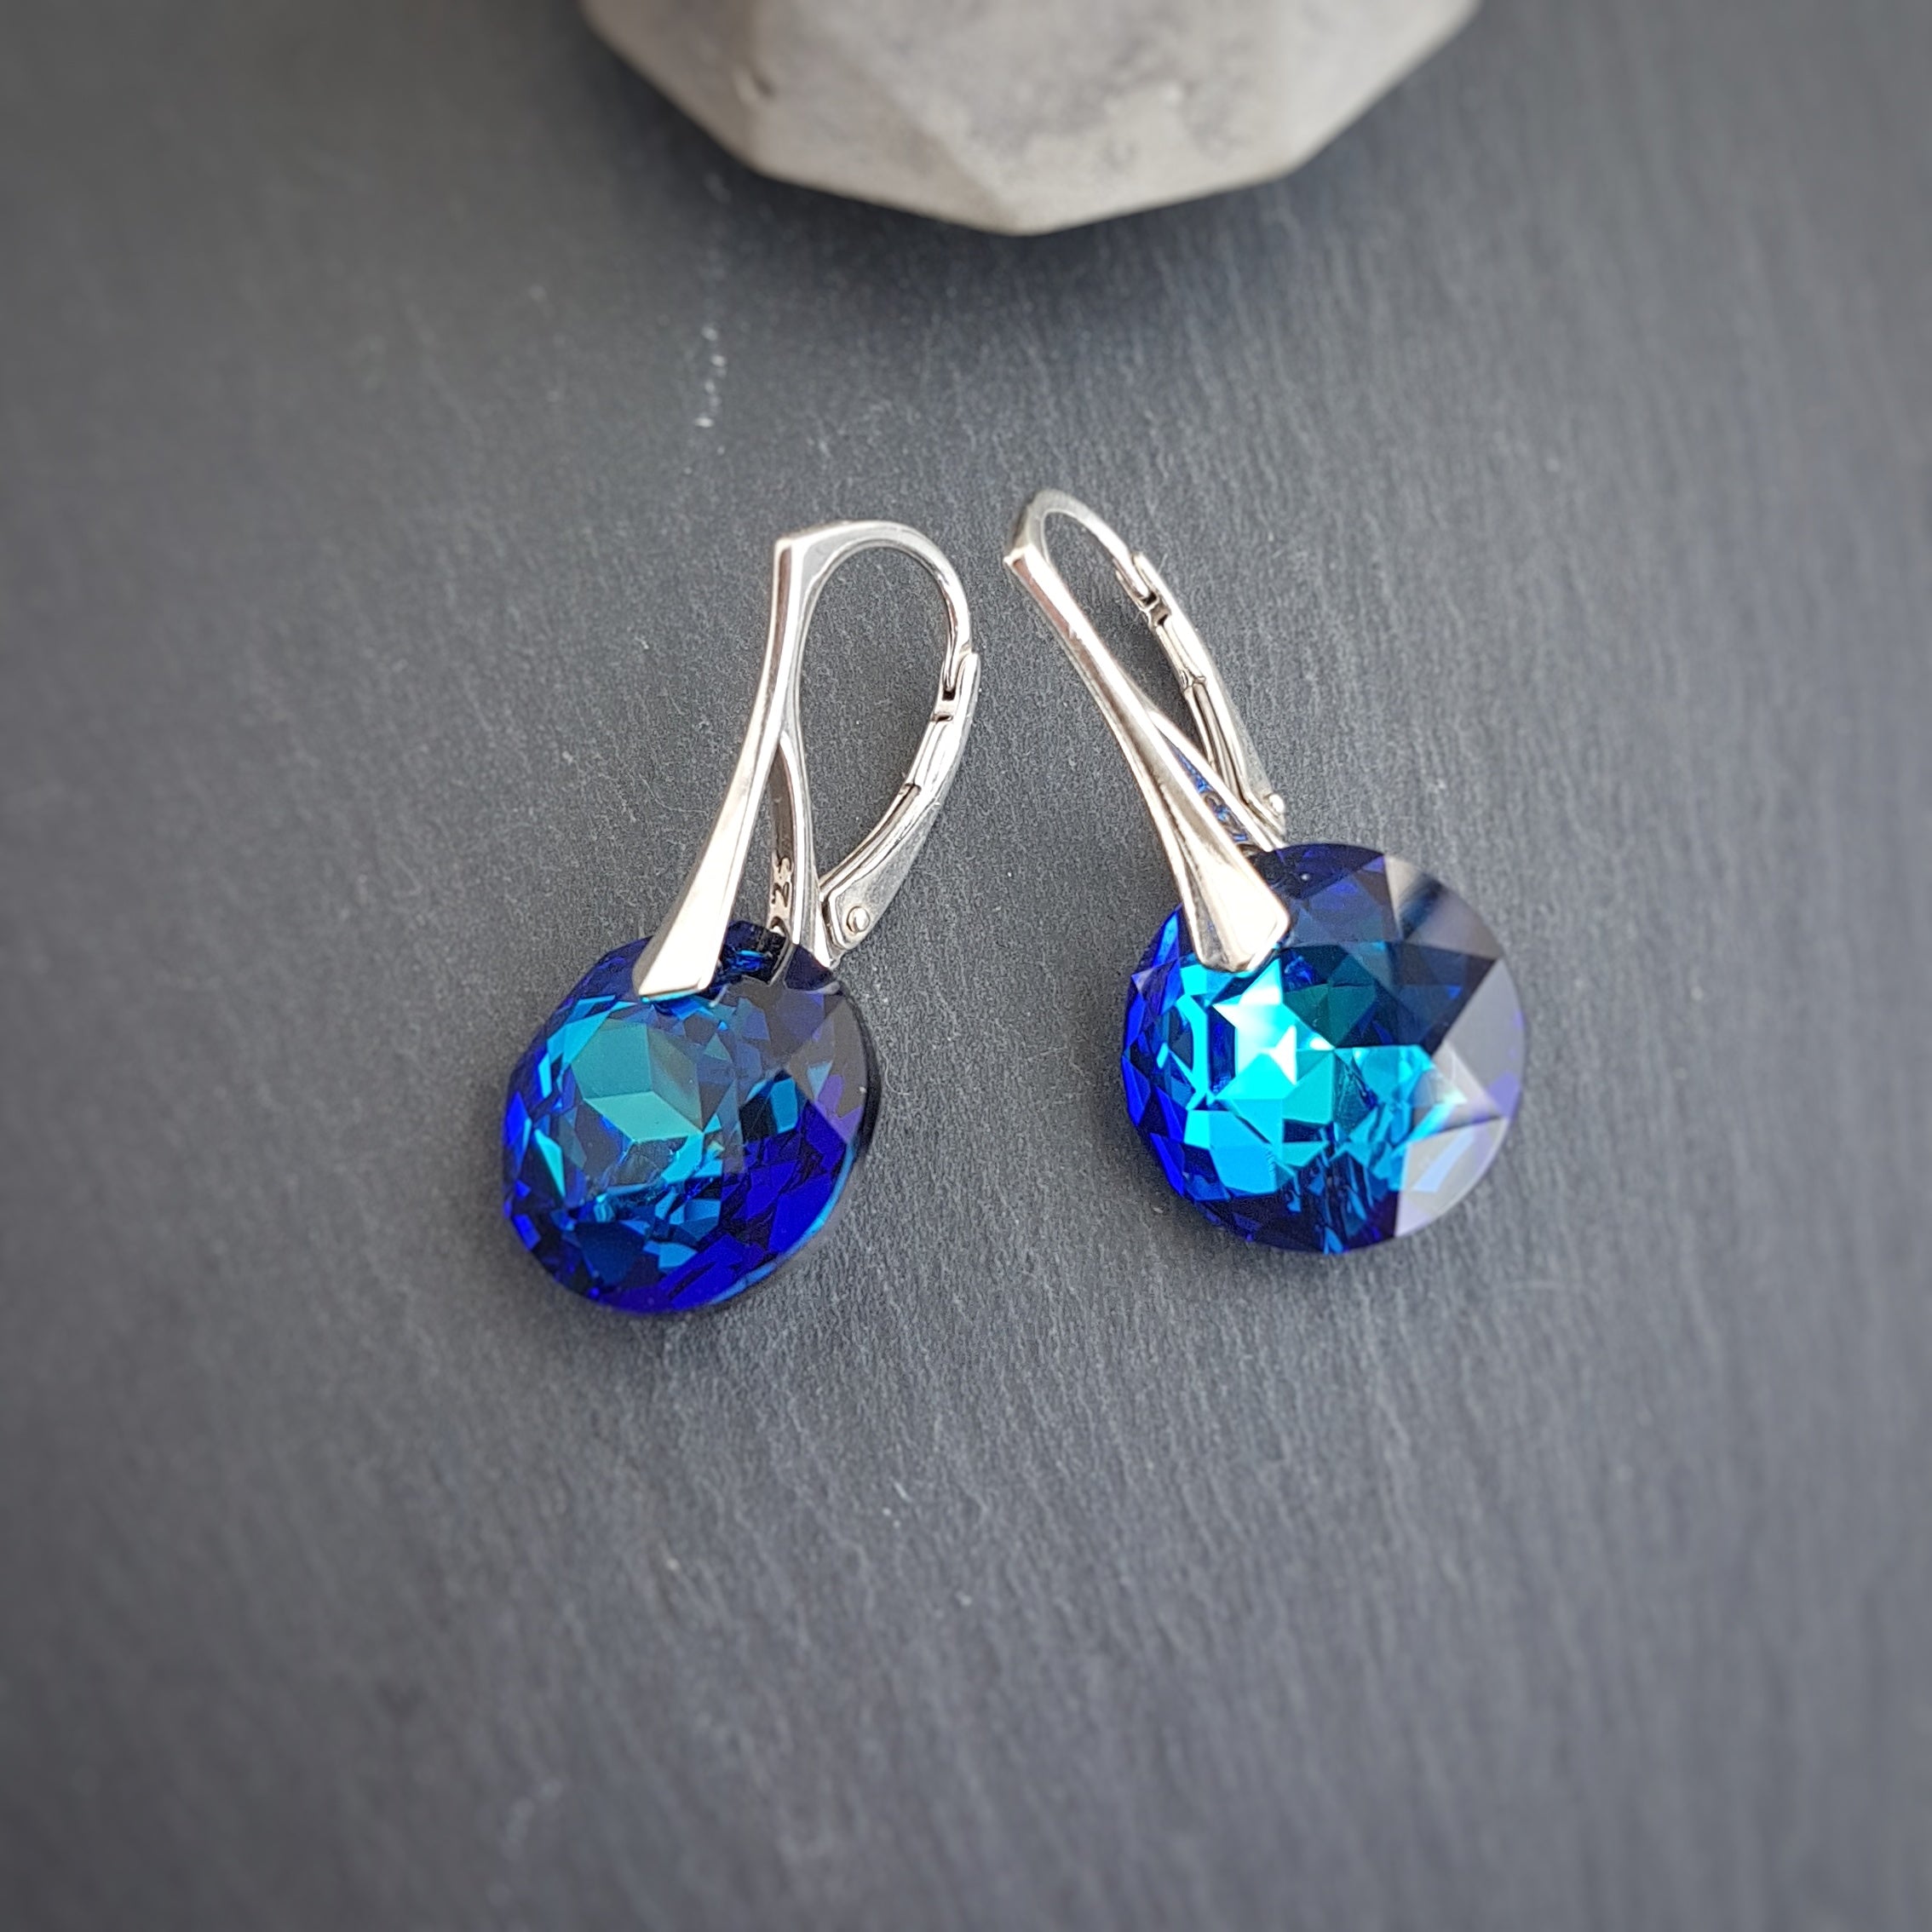 A pair of stylish Bermuda Blue Chaton Crystal Earrings with Sterling Silver 925 leverbacks, handmade for women in Ireland by Magpie Gems Jewellery.